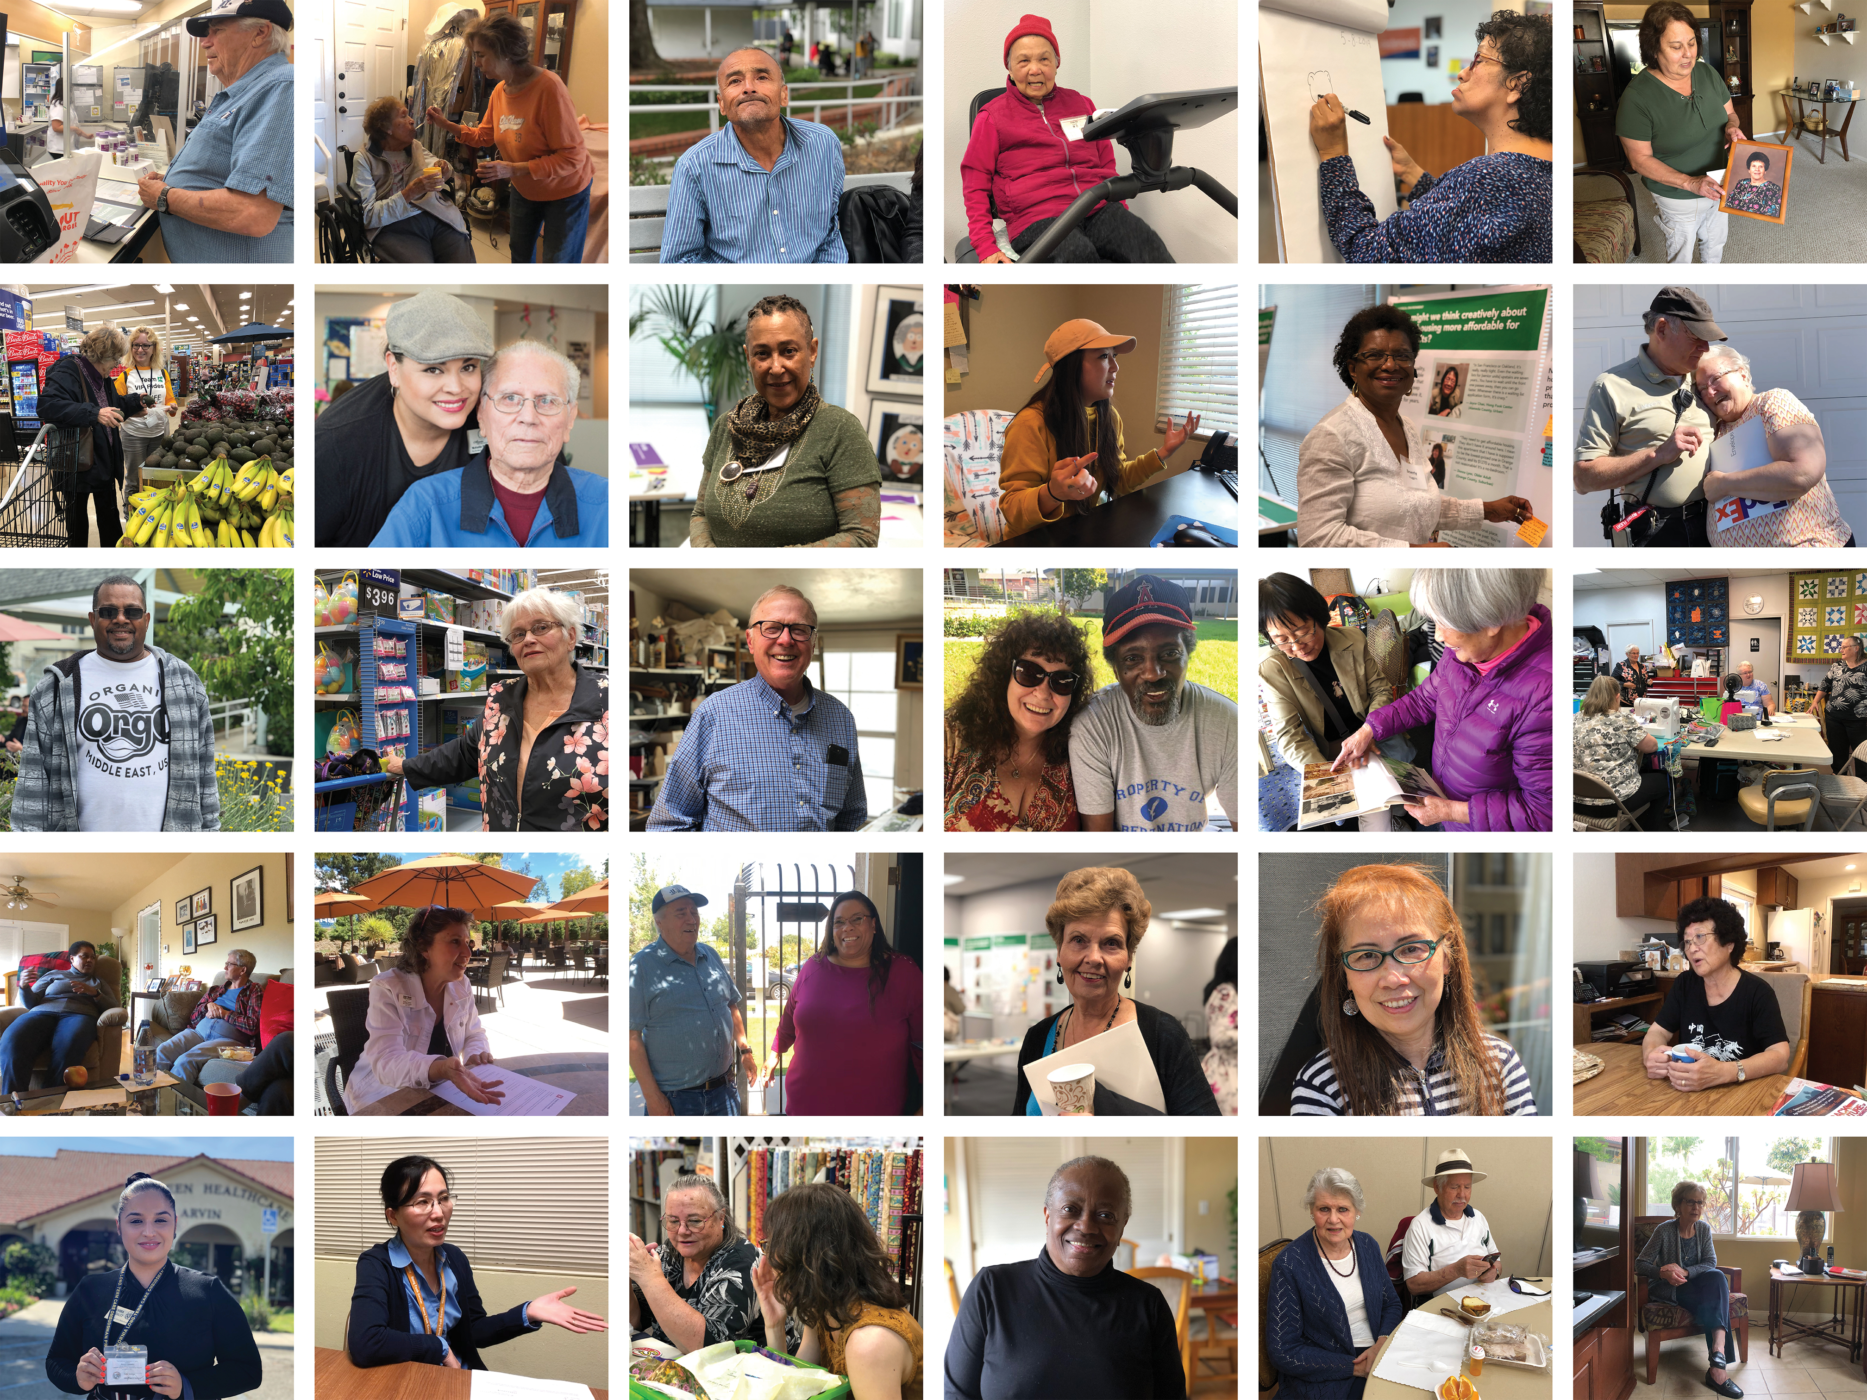 A grid of 30 rectangular images of people, mostly older adults, of all races, some alone, some with another person, most smiling at the camera